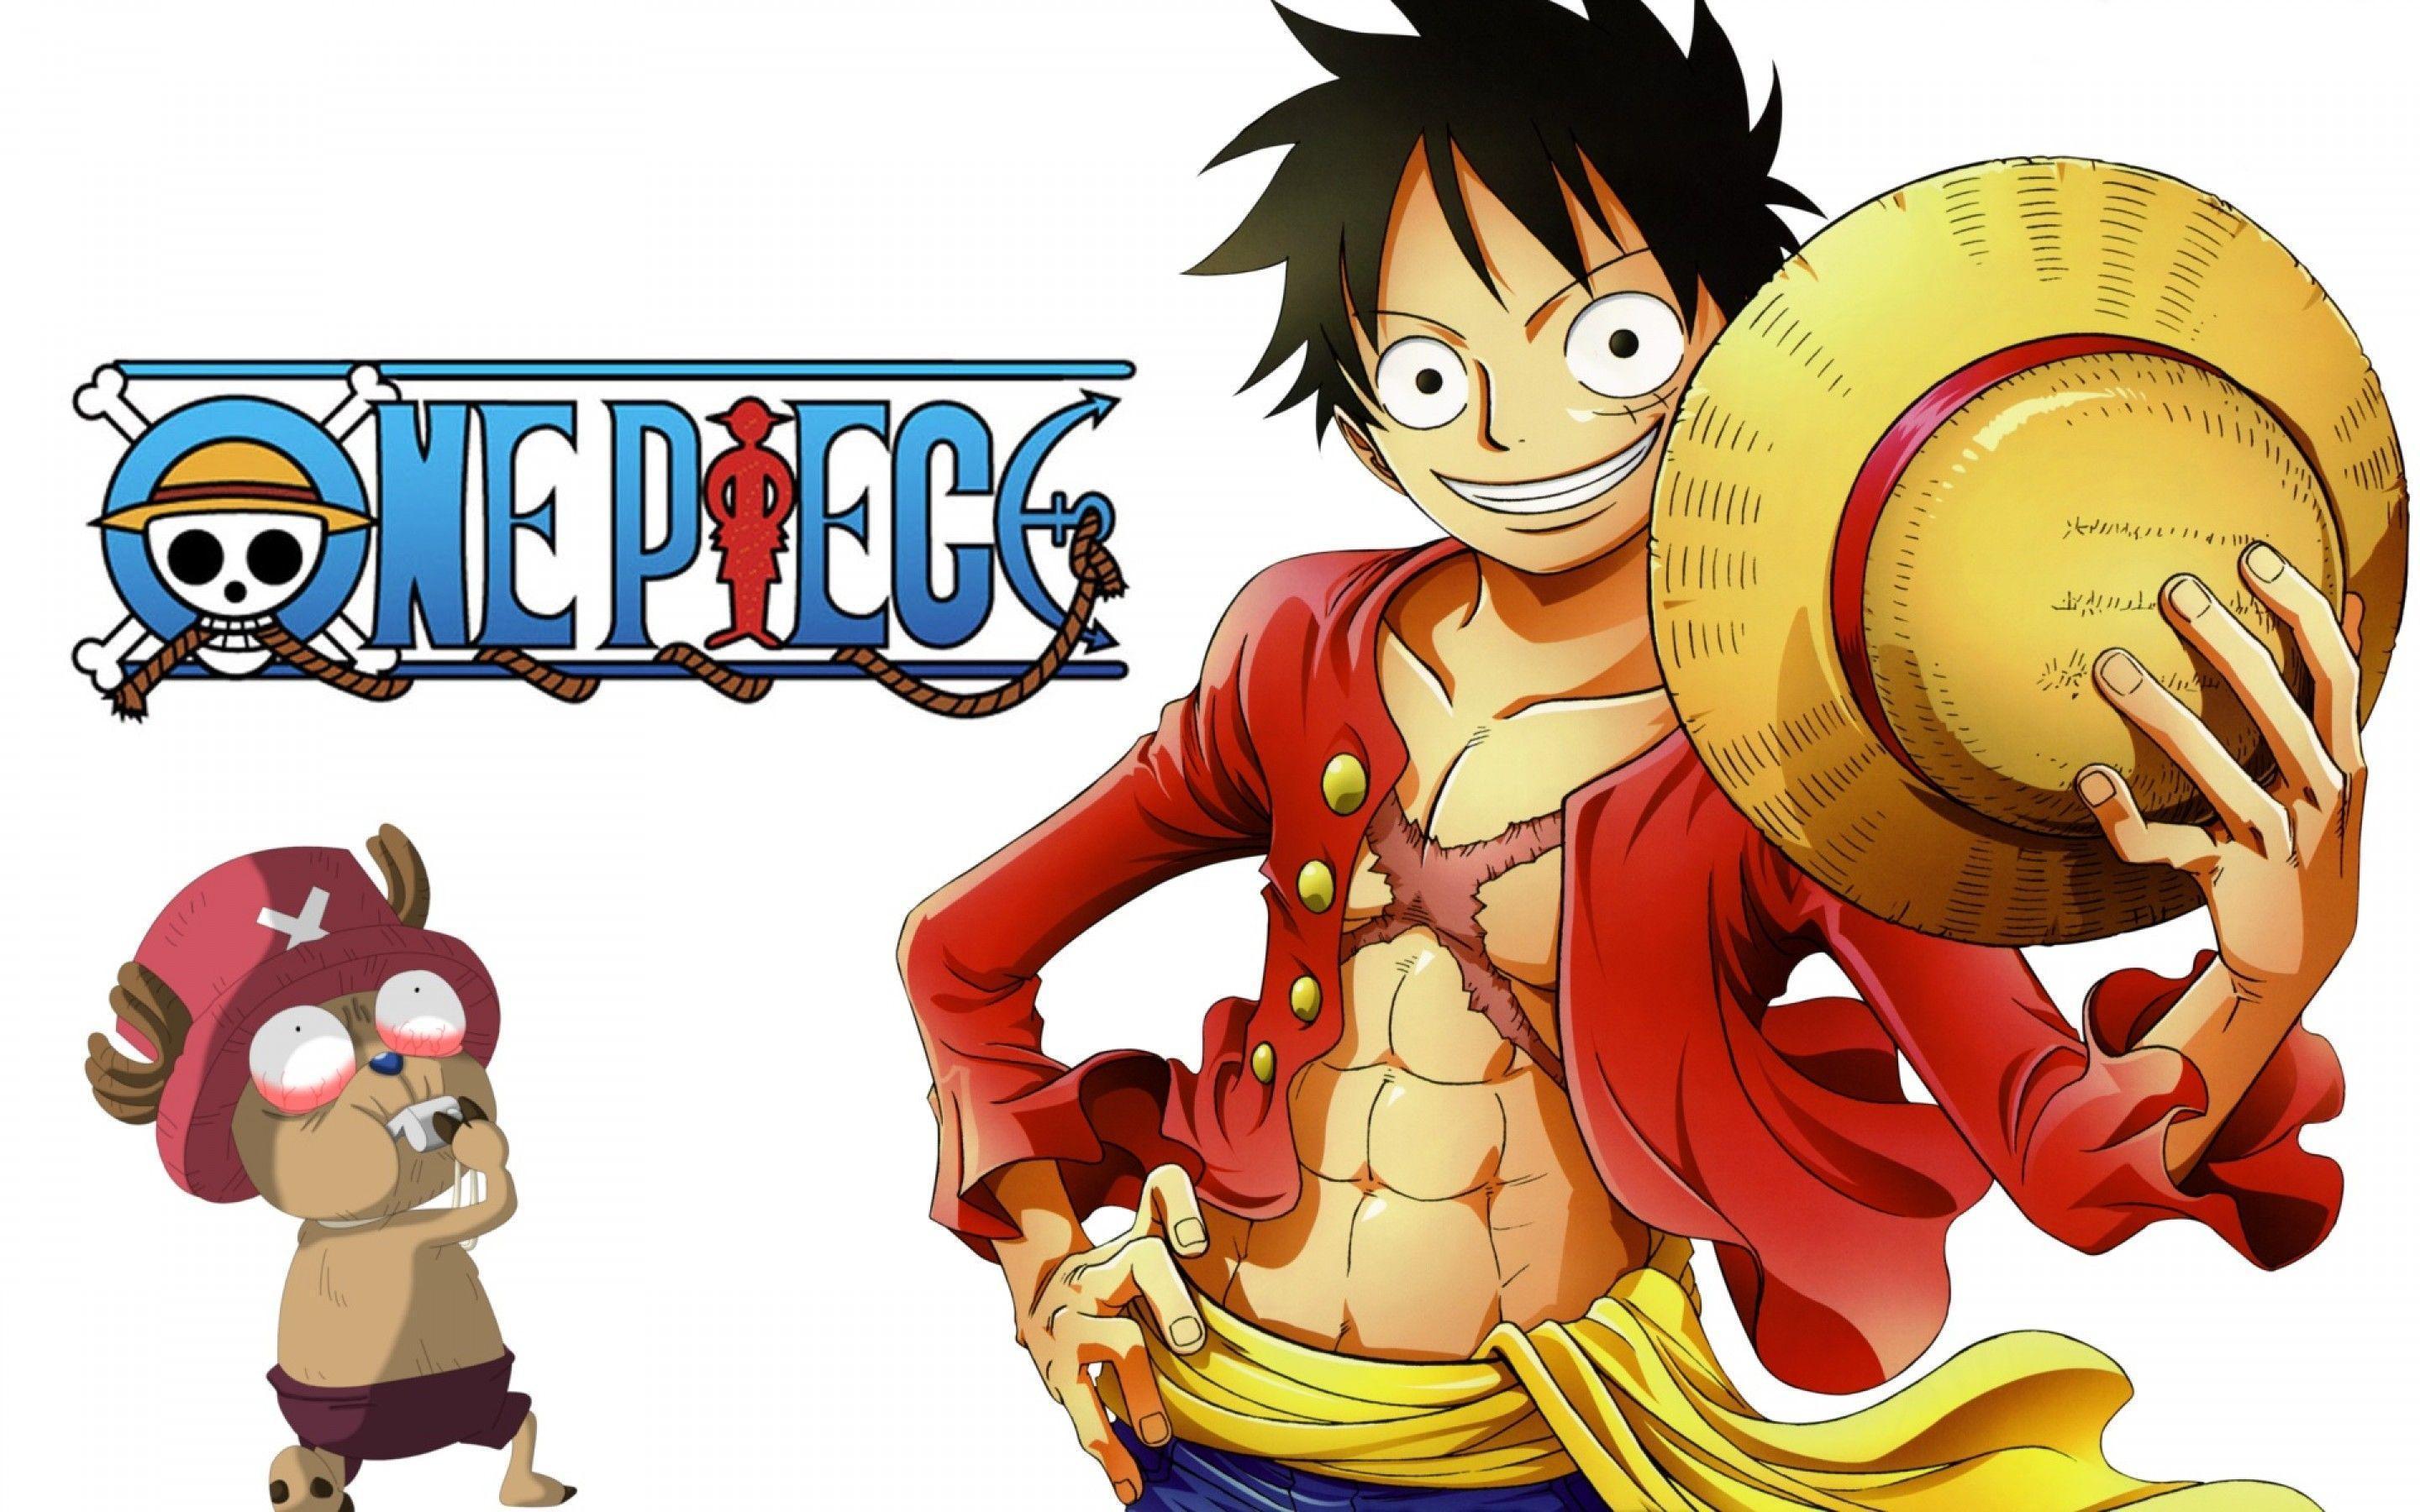 Luffy One Piece Wallpapers